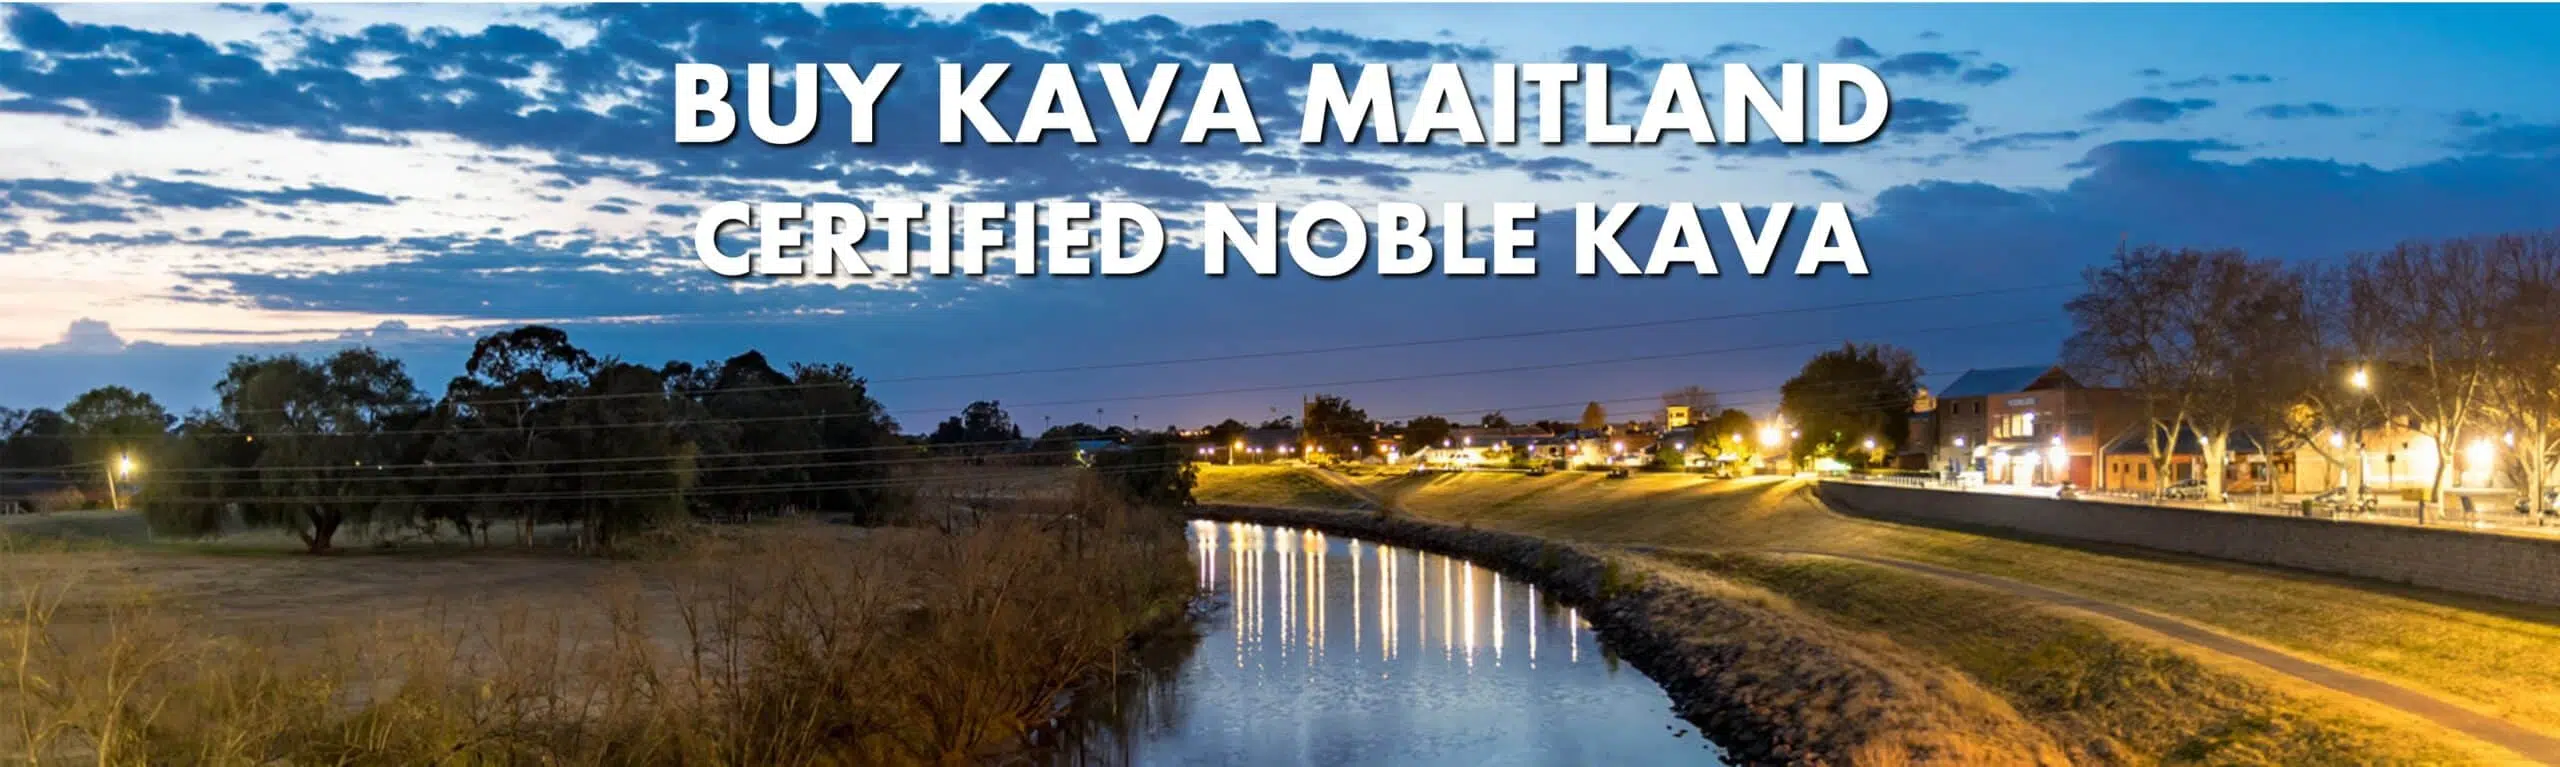 Night scene in Maitland New South Wales with caption Buy Kava Maitland Certified Noble Kava